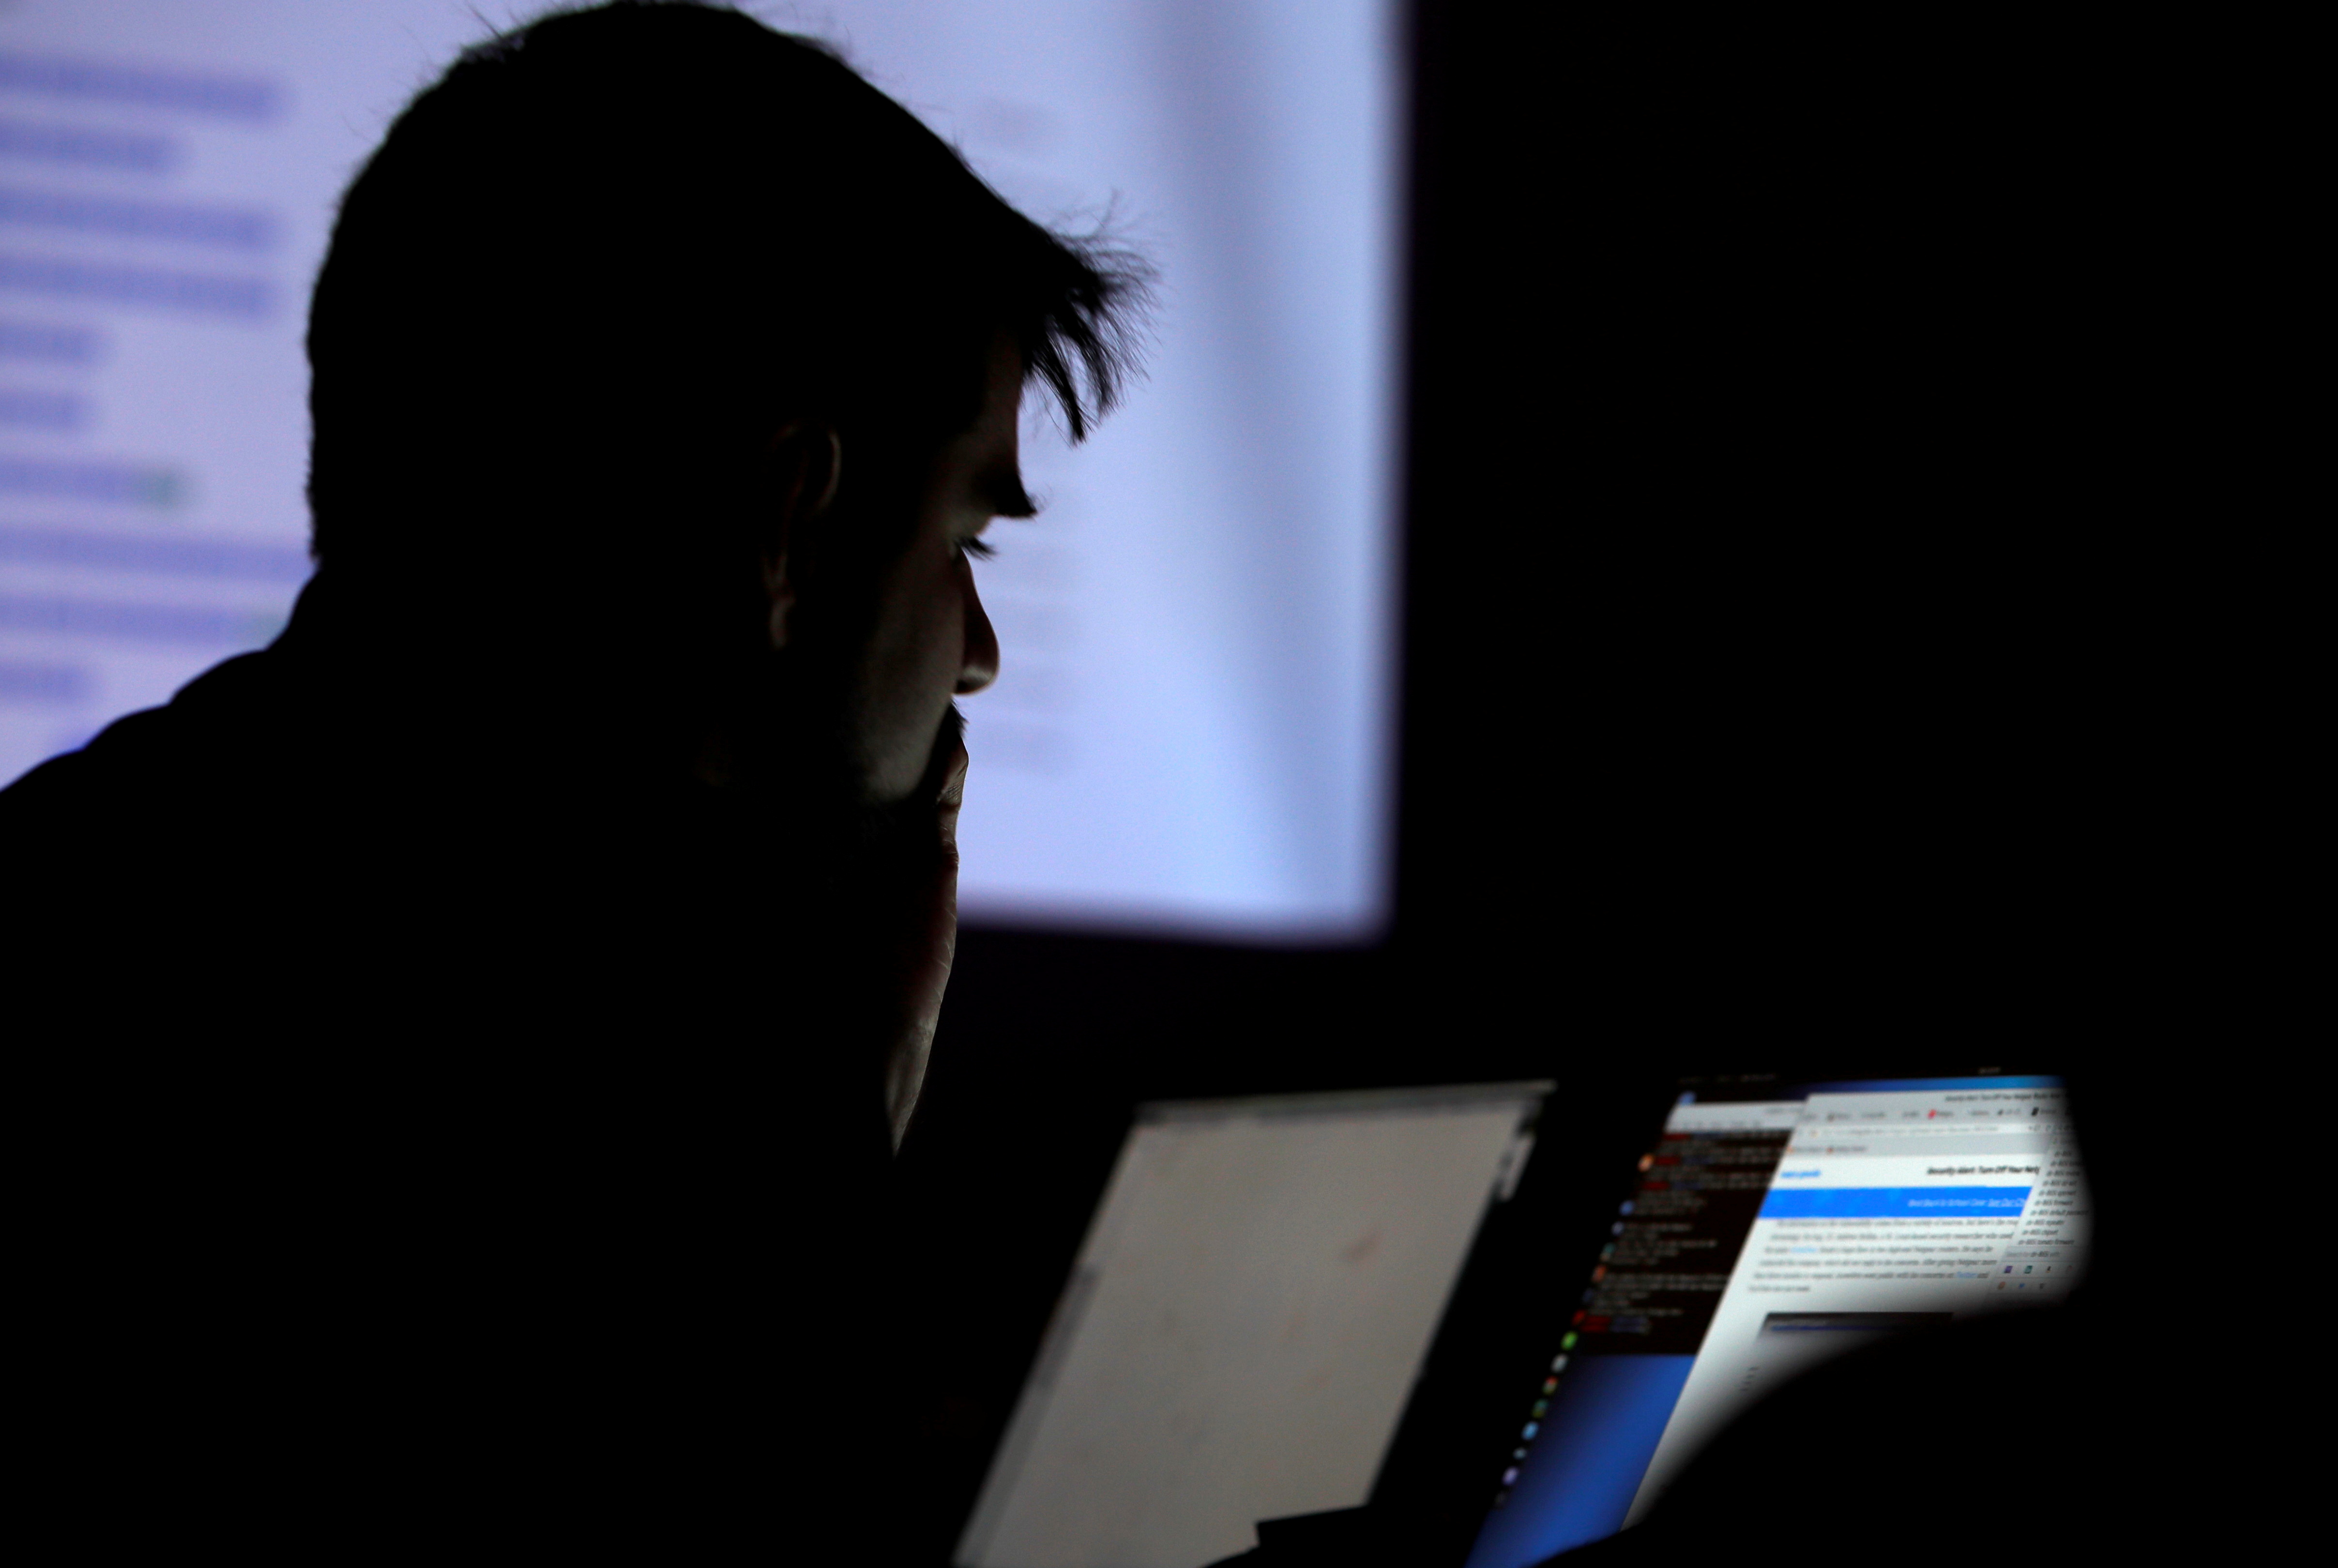 A man takes part in a hacking contest during the Def Con hacker convention in Las Vegas